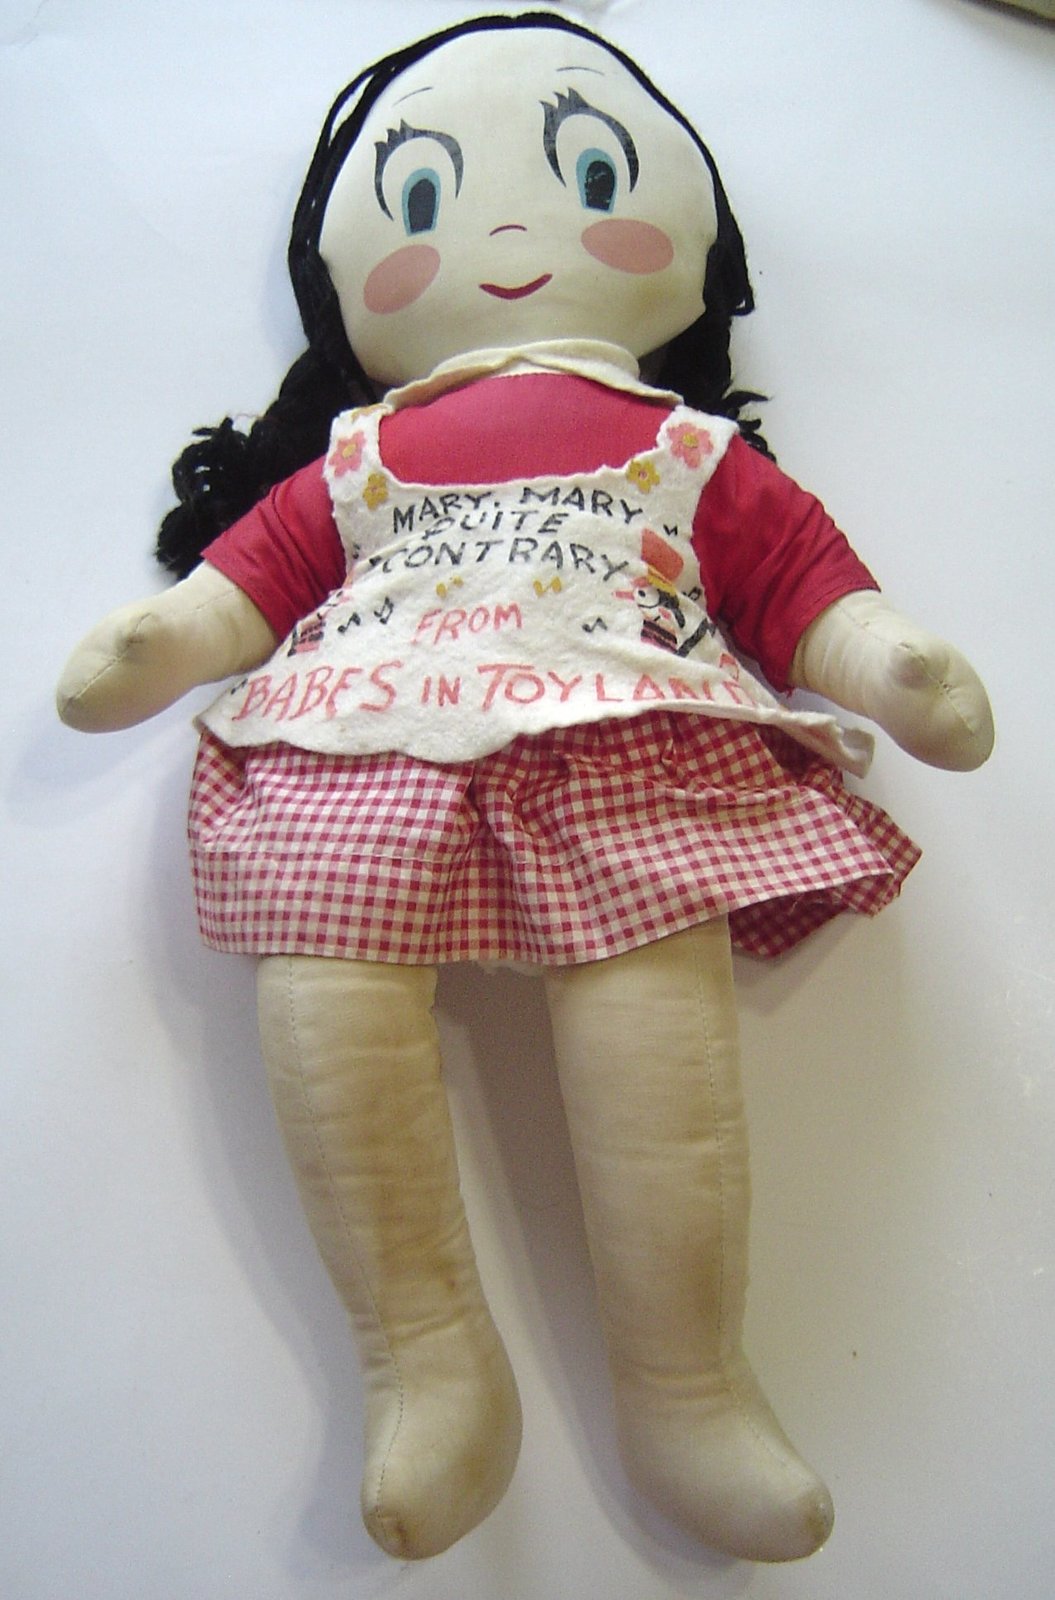  1950's Gund Mary Mary Quite Contrary From Babes in Toyland  Cloth Doll  - $149.99